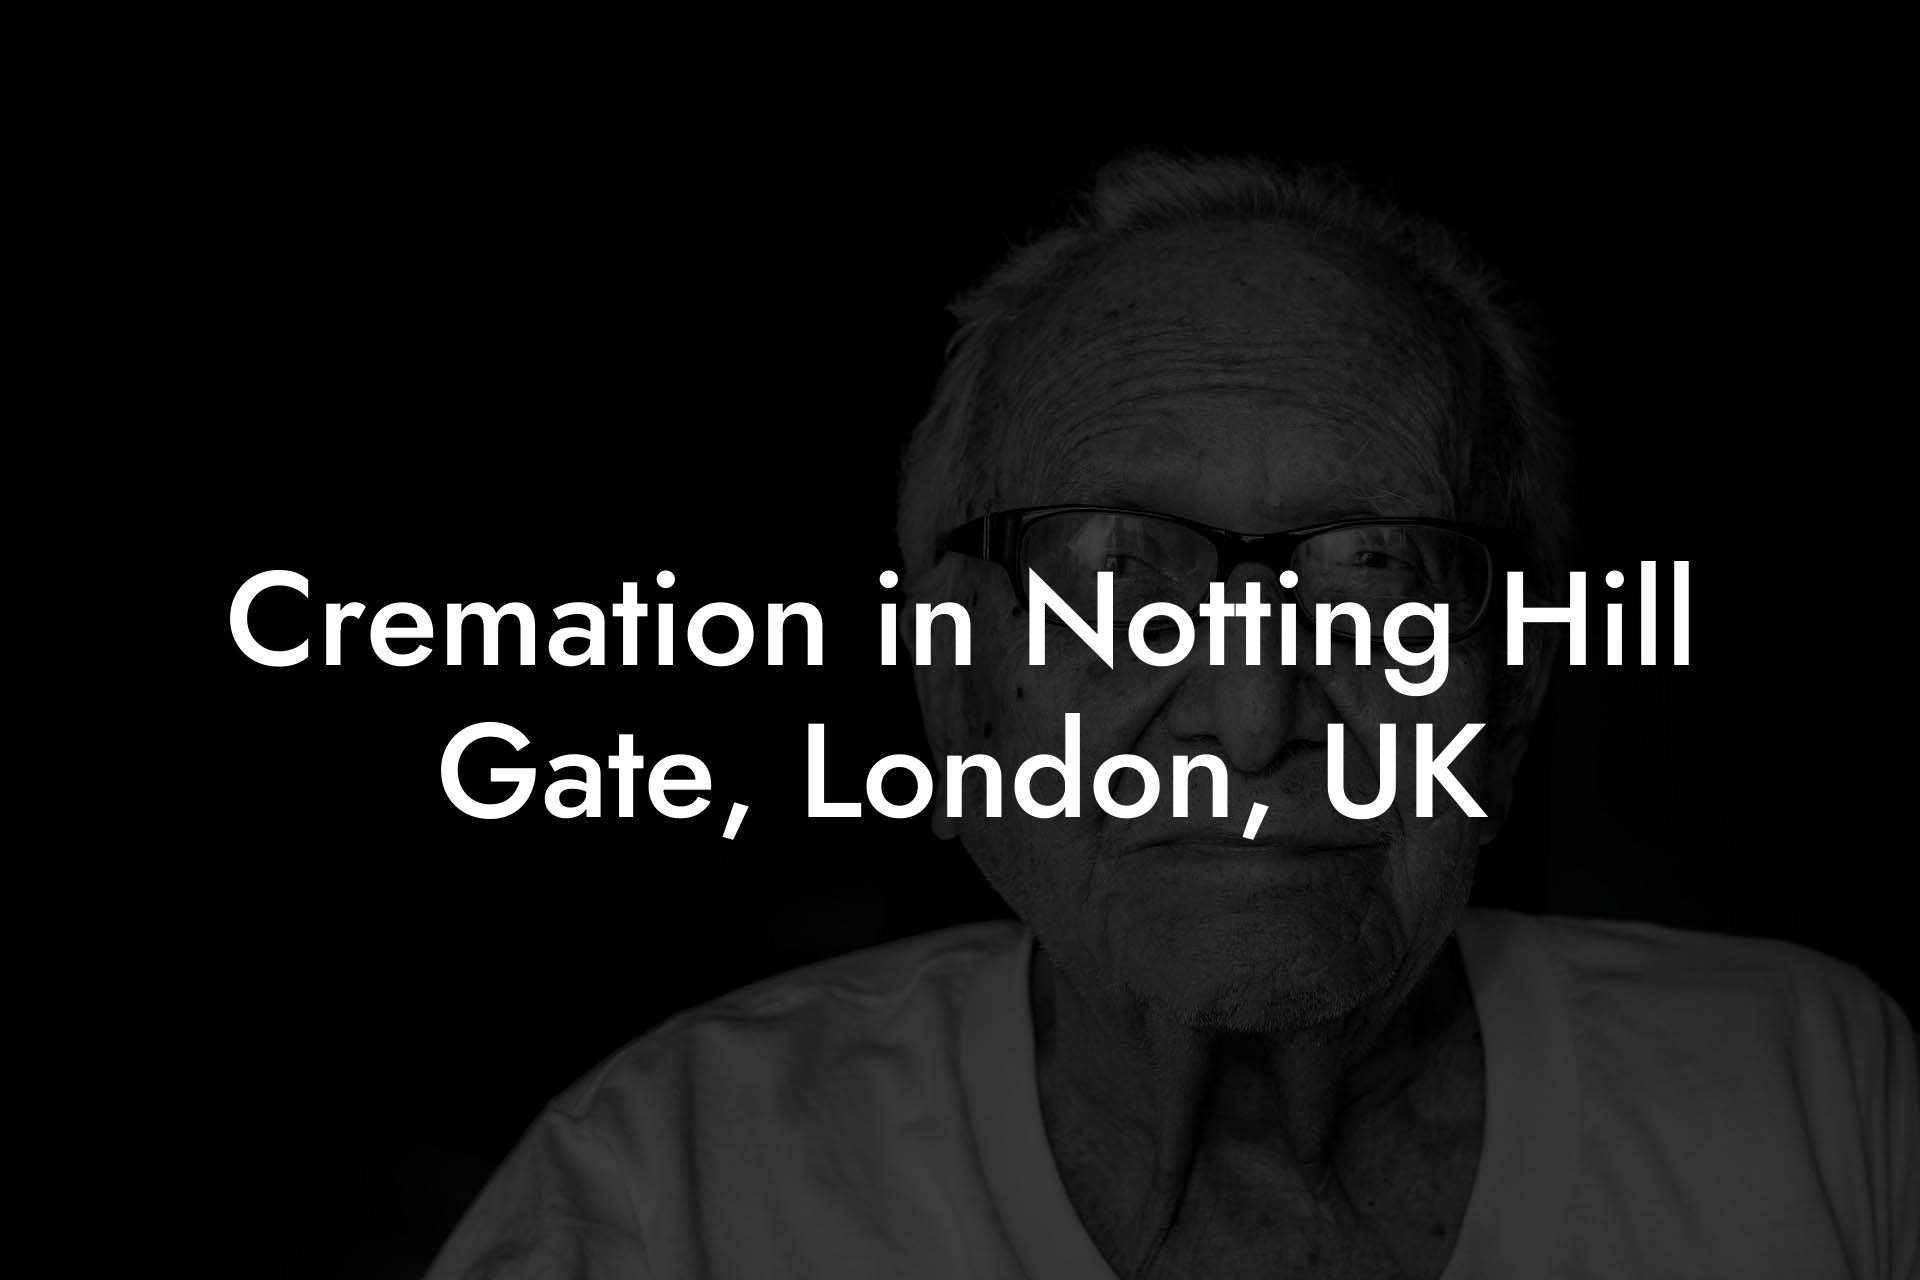 Cremation in Notting Hill Gate, London, UK